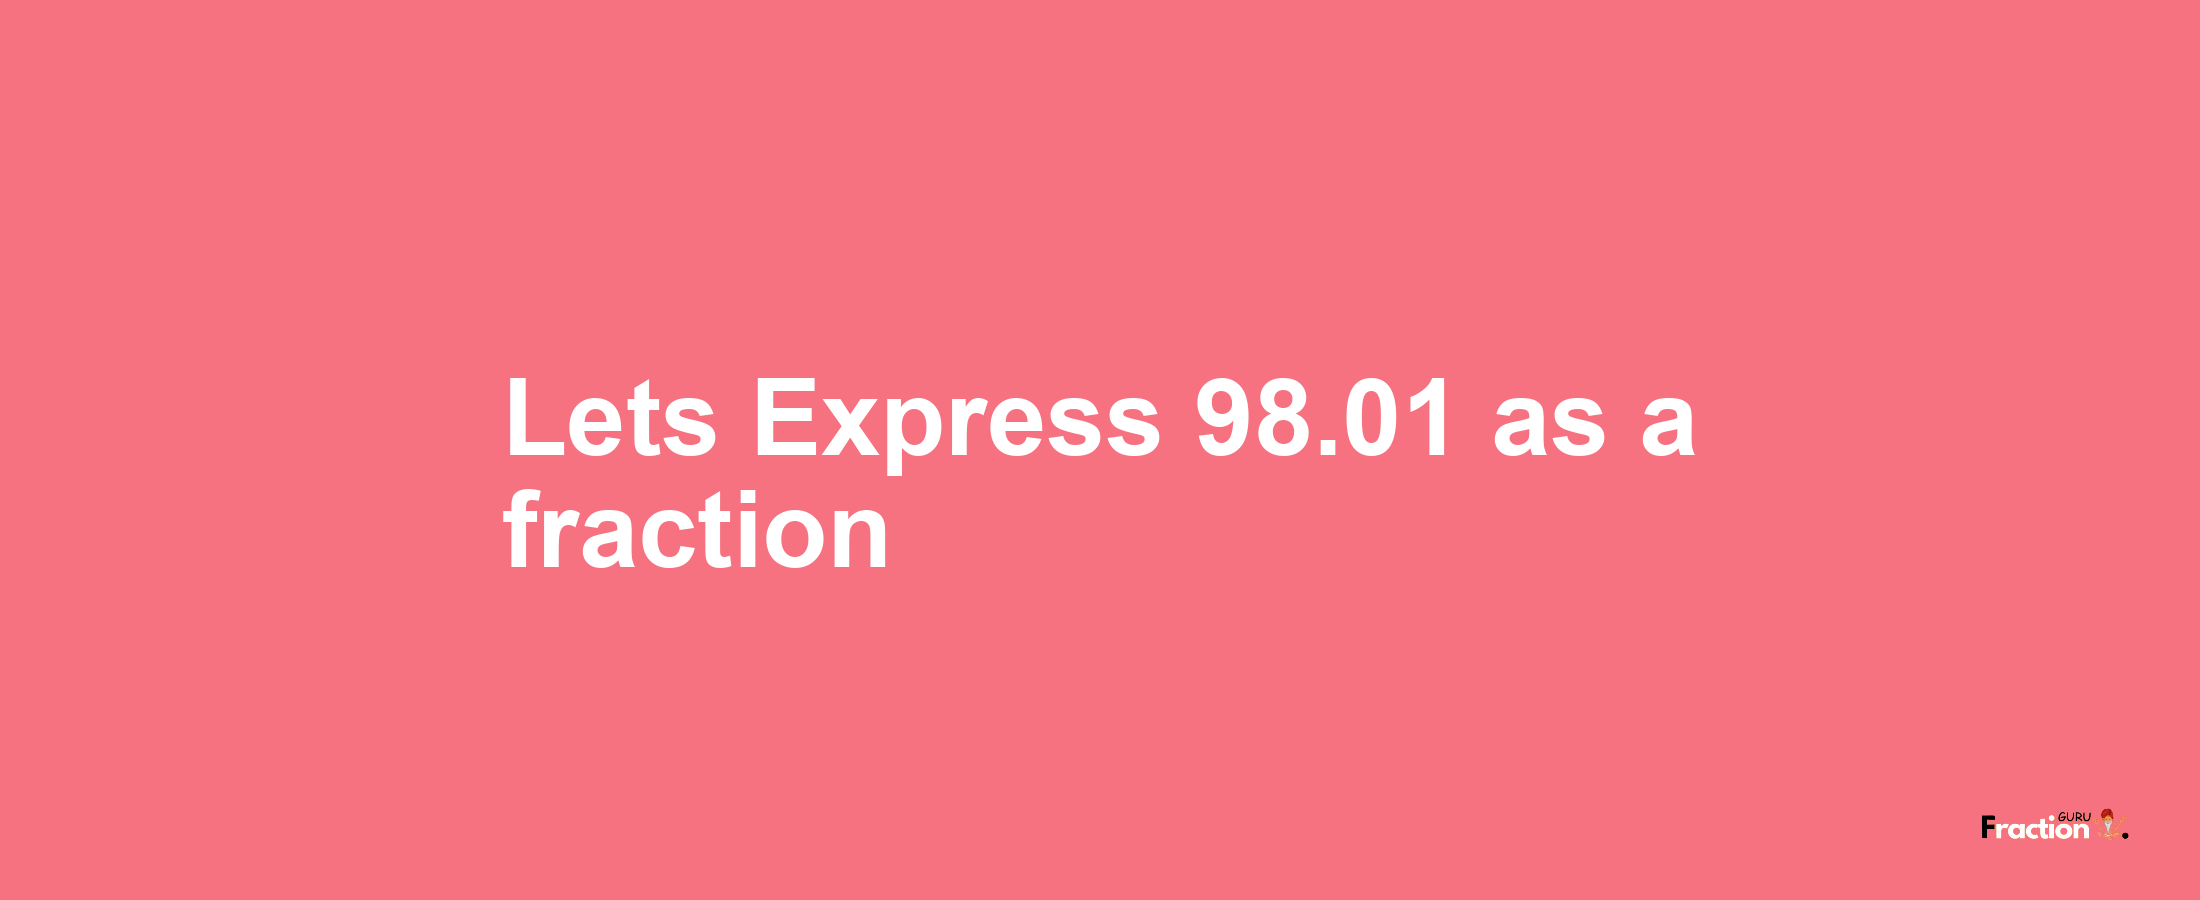 Lets Express 98.01 as afraction